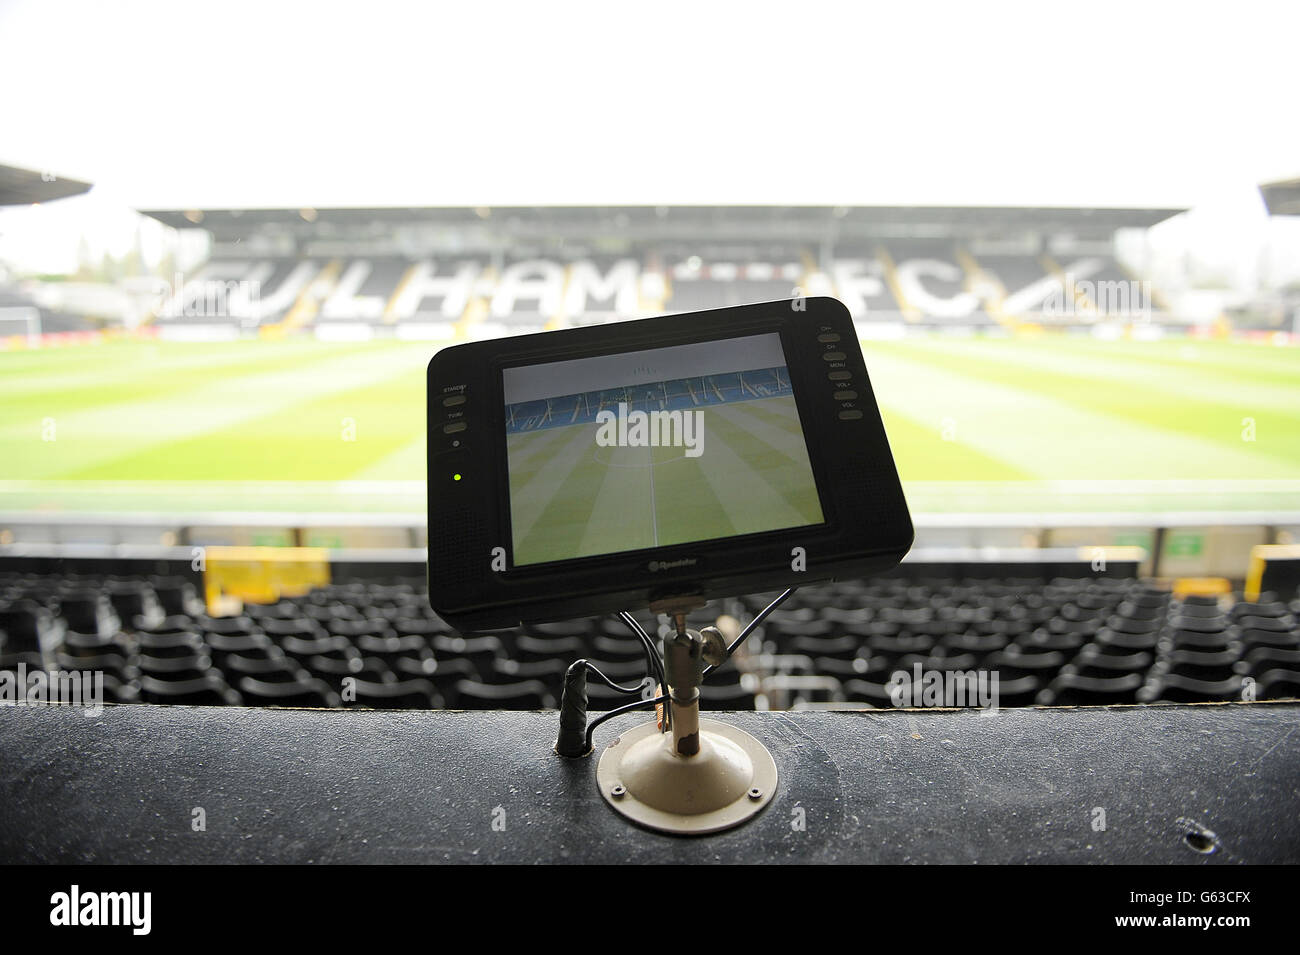 Soccer - Barclays Premier League - Fulham v Reading - Craven Cottage. A general view of technological facilities at Craven Cottage Stock Photo